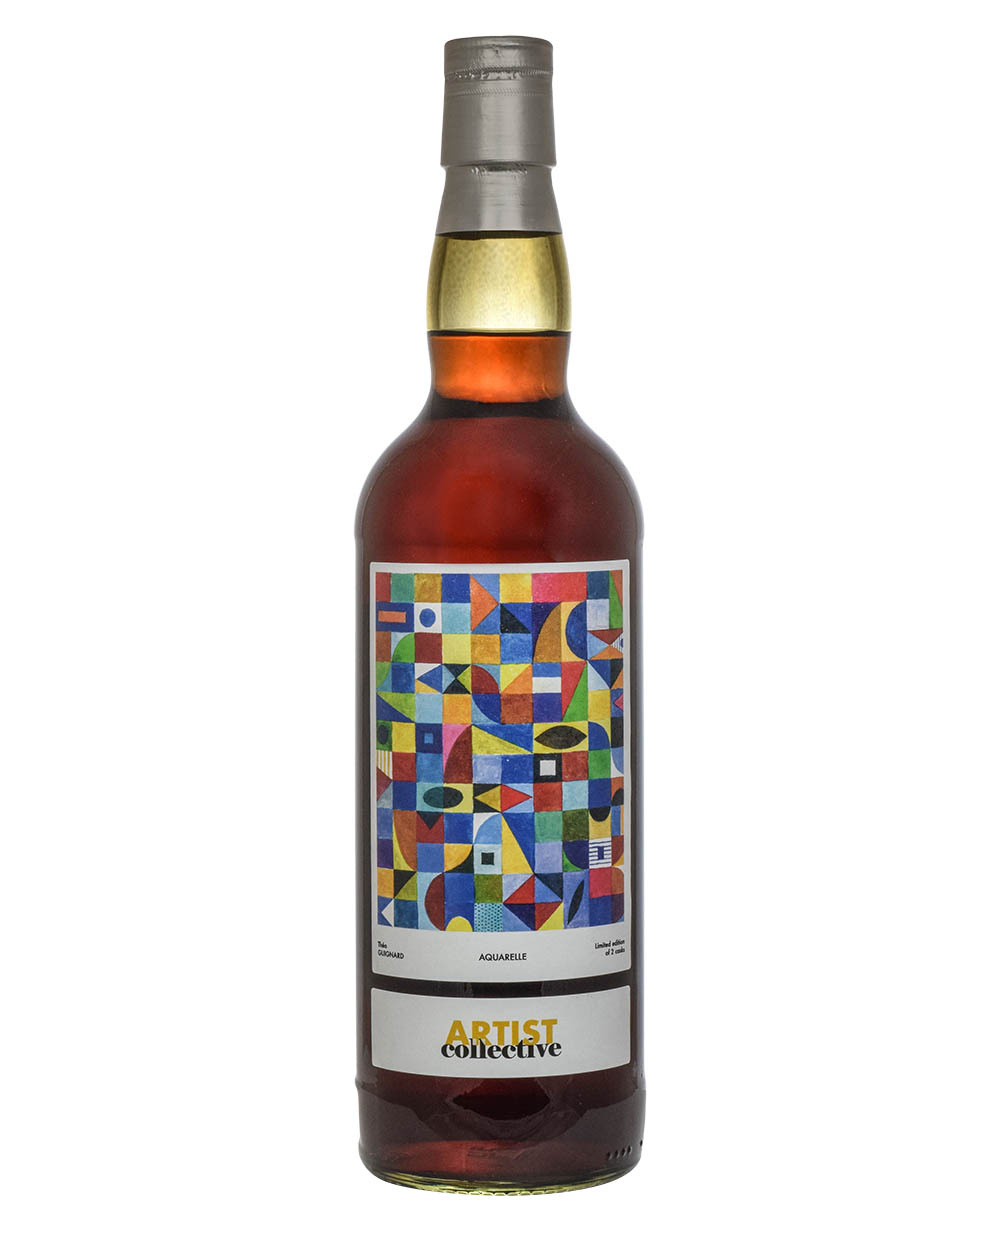 Auchentoshan 13 Years Old Artist Collective 2007 Must Have Malts MHM